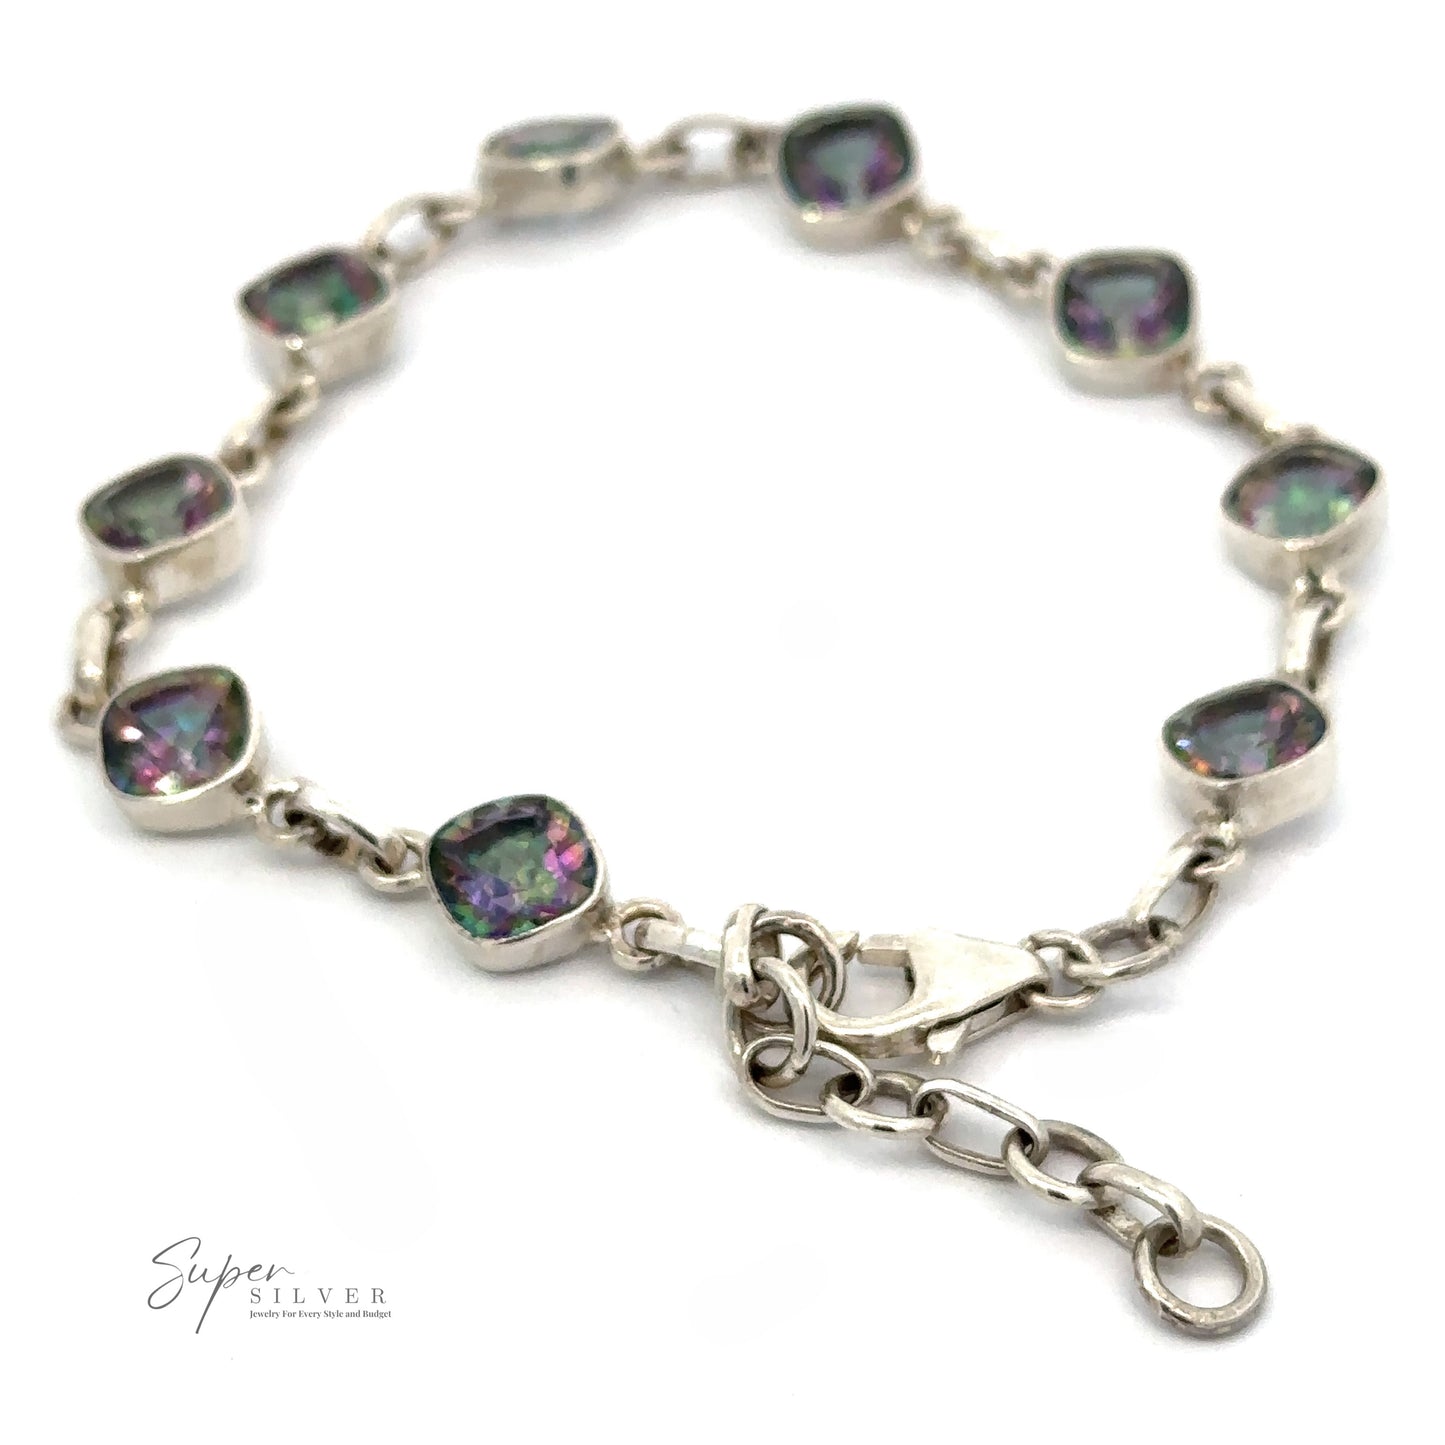 
                  
                    A Rainbow Mystic Topaz Diamond Link Bracelet with a lobster clasp featuring square-shaped, prismatic Mystic Topaz stones set in linked frames. The bracelet is displayed on a white background.
                  
                